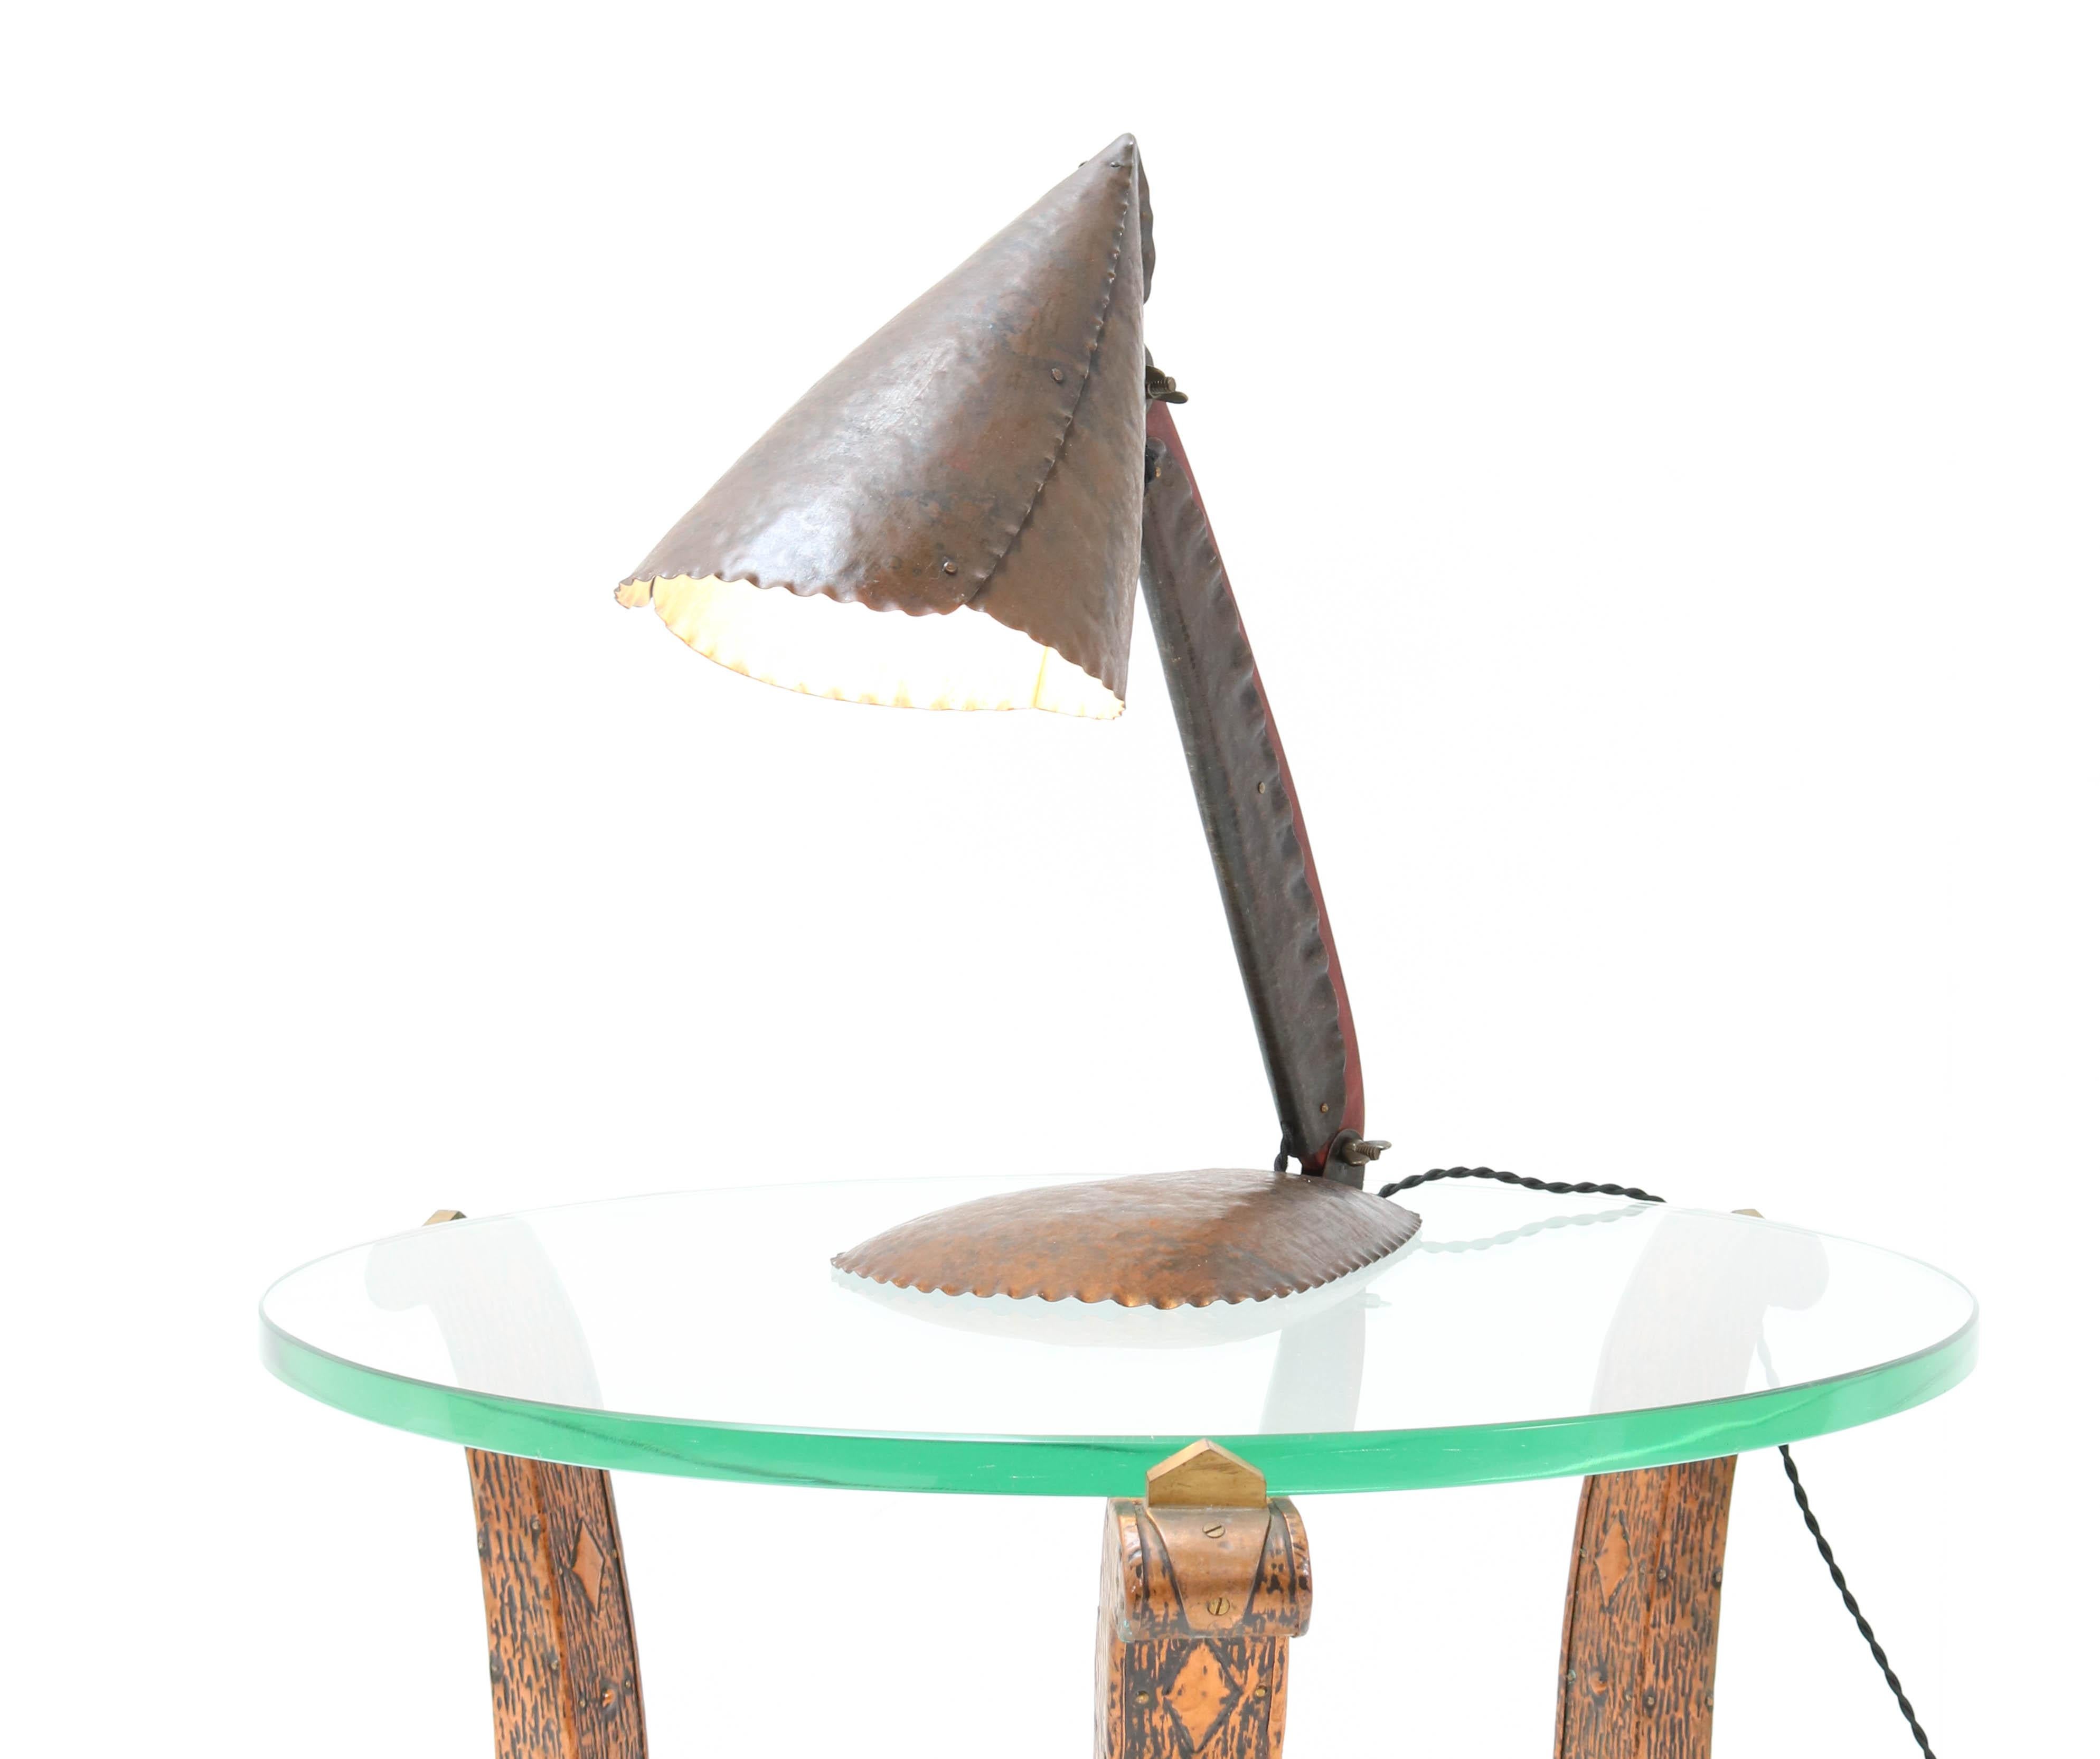 Magnificent and rare Art Deco Amsterdam School table lamp.
Design by Johan Verhey Rotterdam.
Striking Dutch design from the 1930s.
Patinated hammered metal and mahogany stained wood.
Rewired with one socket for E27 light bulb.
In very good